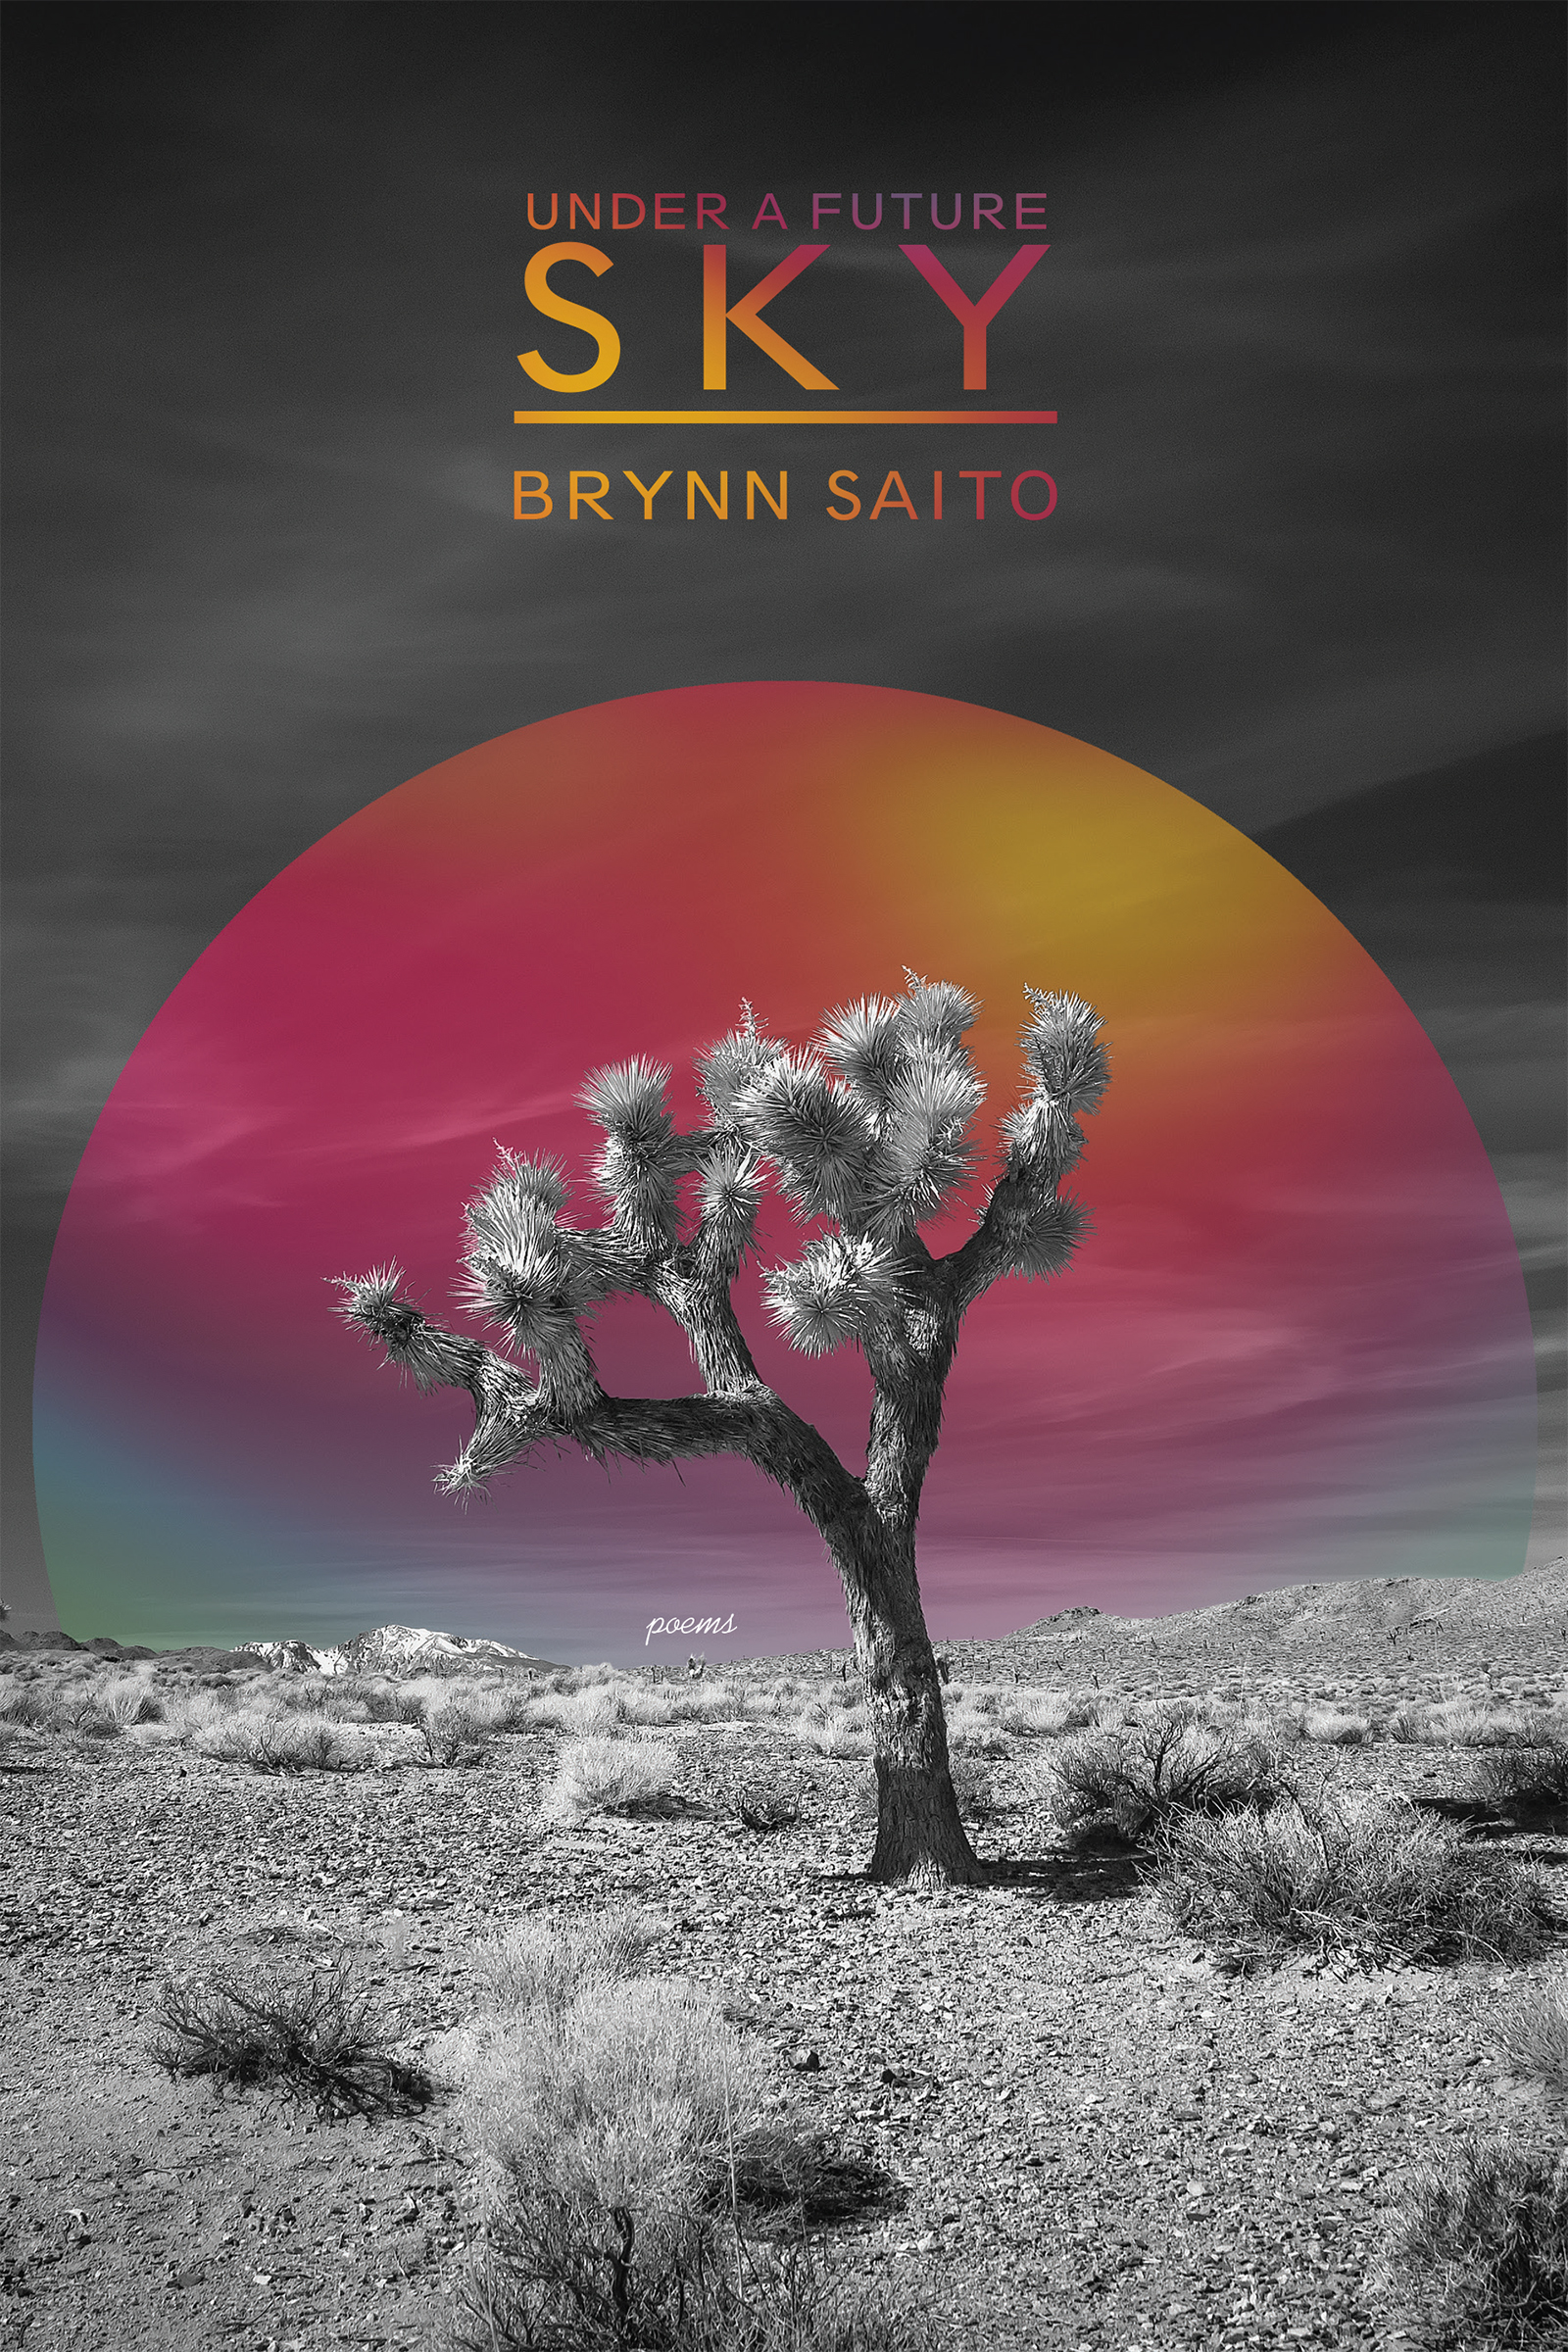 A black and white photo of a joshua tree with a color gradient of pinks and yellows in a half-circle behind the joshua tree, with "Under a Future Sky, poems by Brynn Saito" in colored text